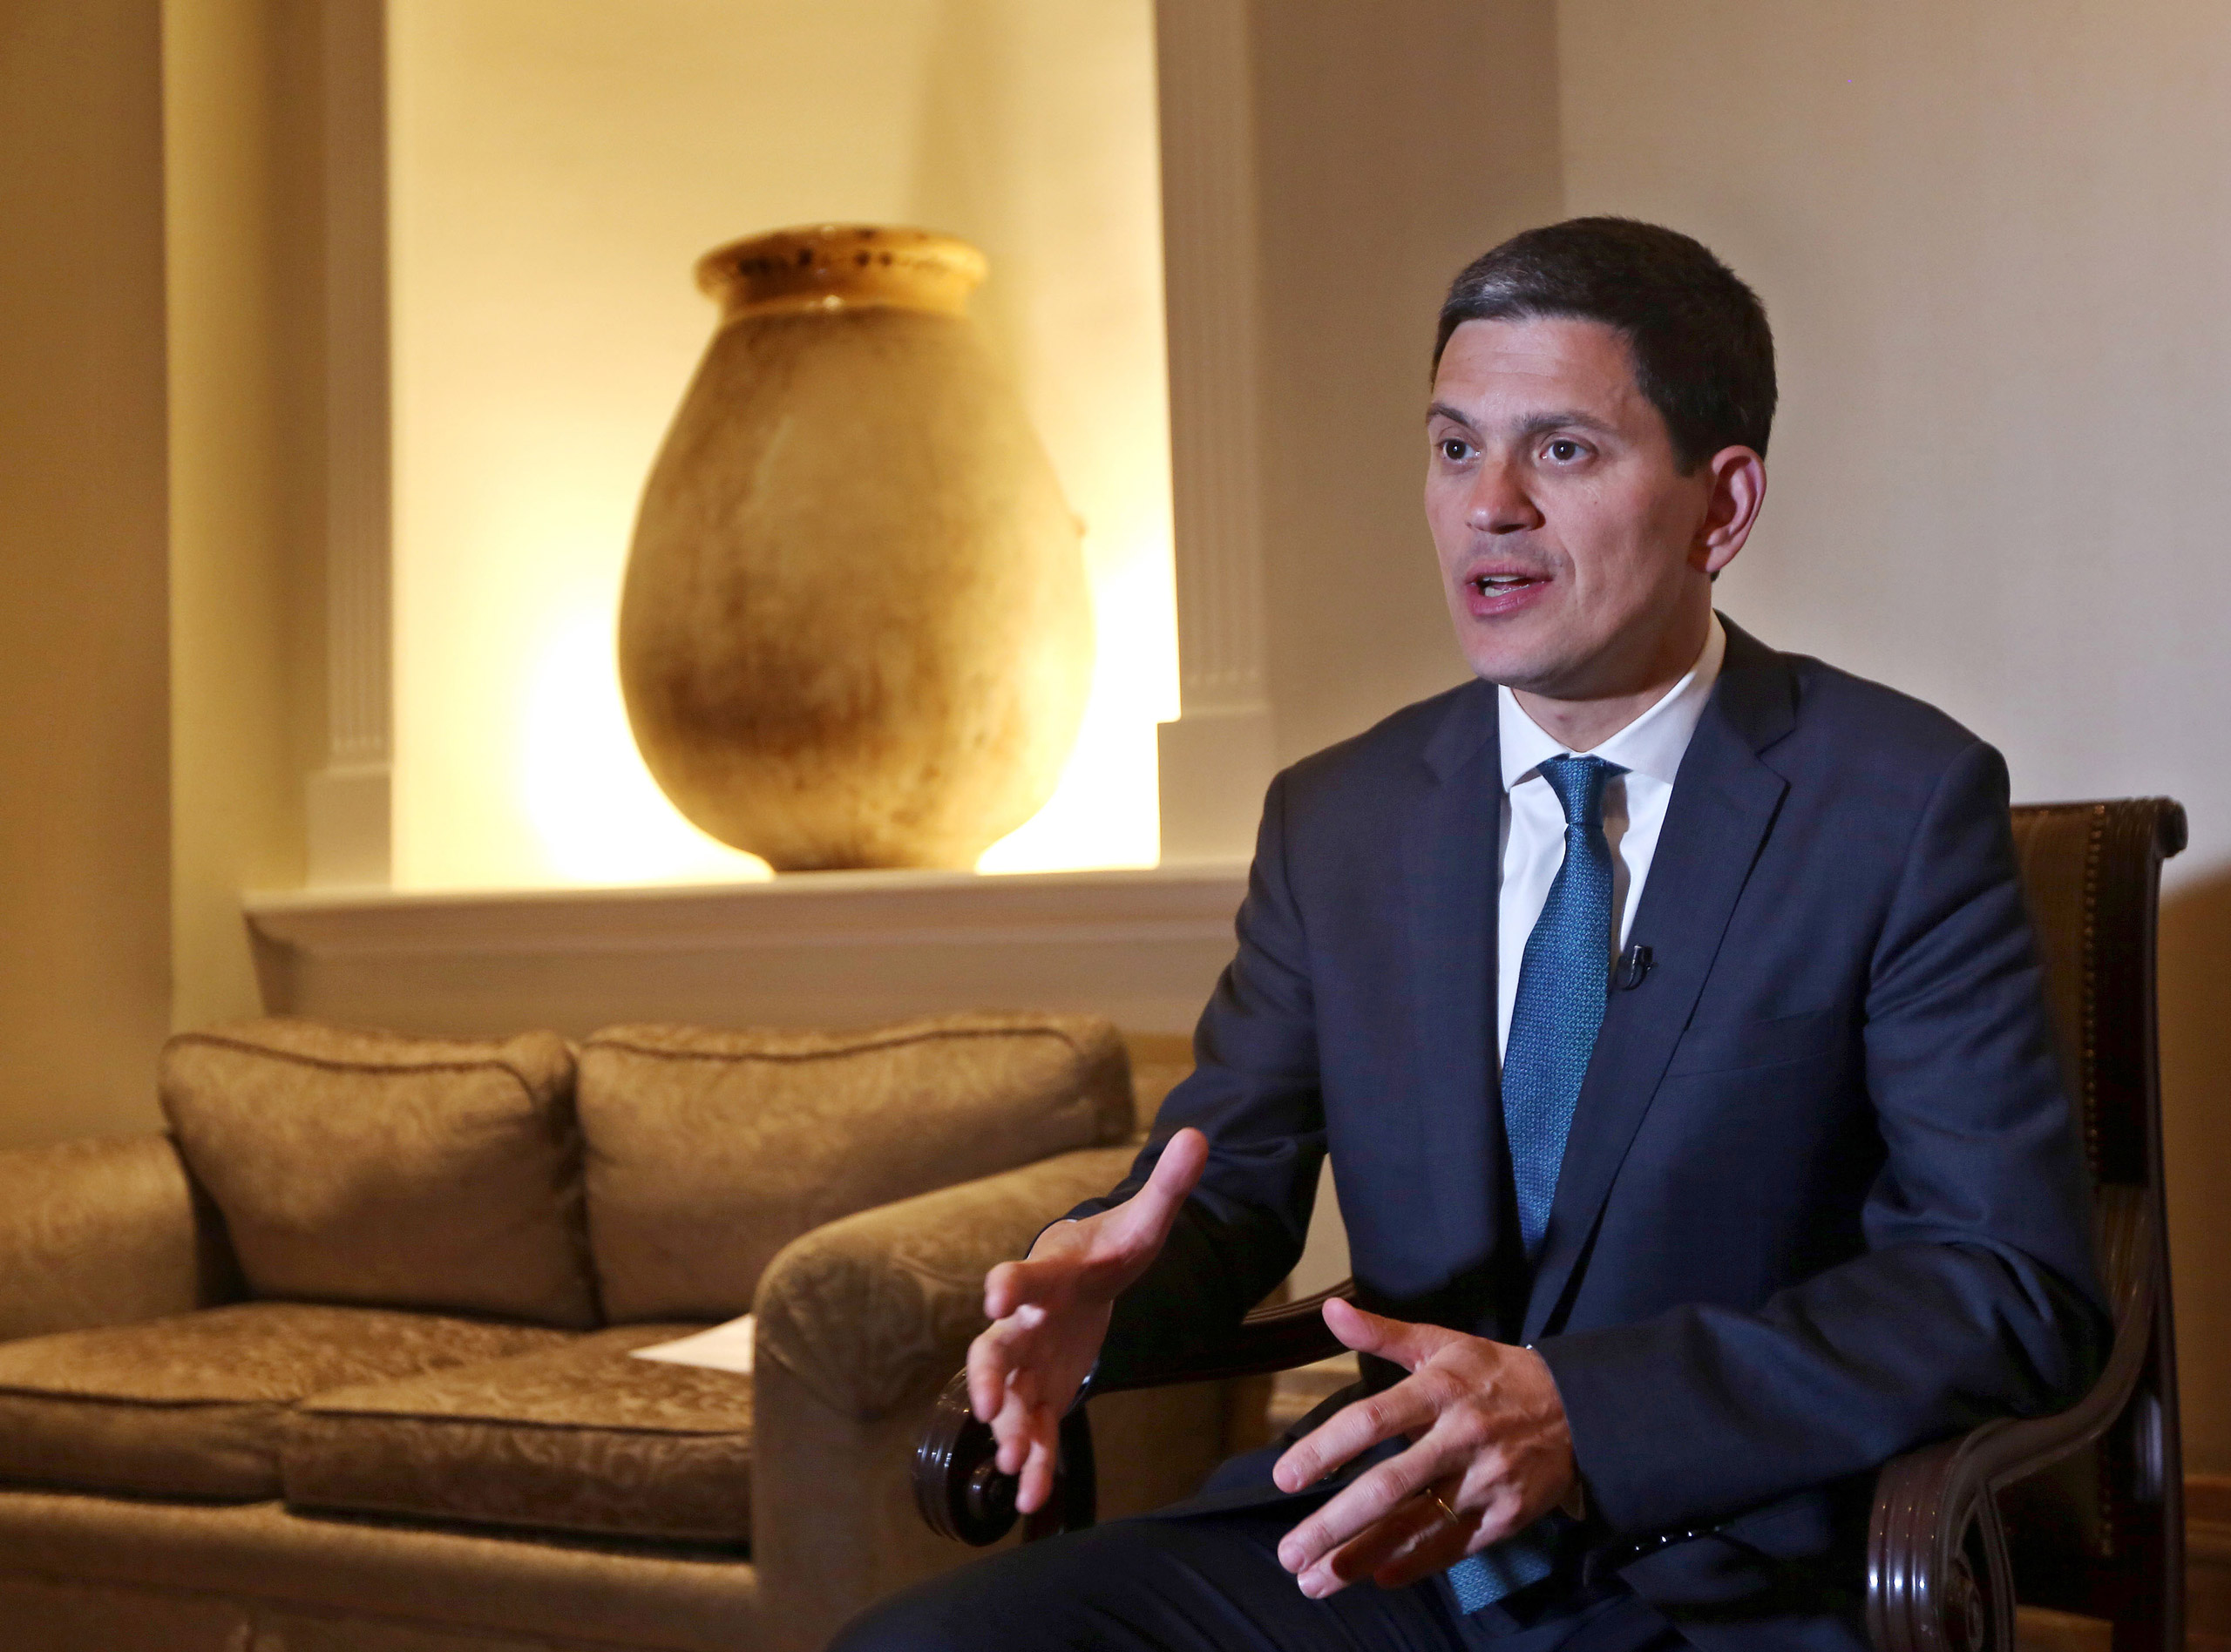 David Miliband, the President and CEO of the International Rescue Committee, speaks during an interview with The Associated Press in Beirut, on Apr. 9, 2015. (Bilal Hussein—AP)